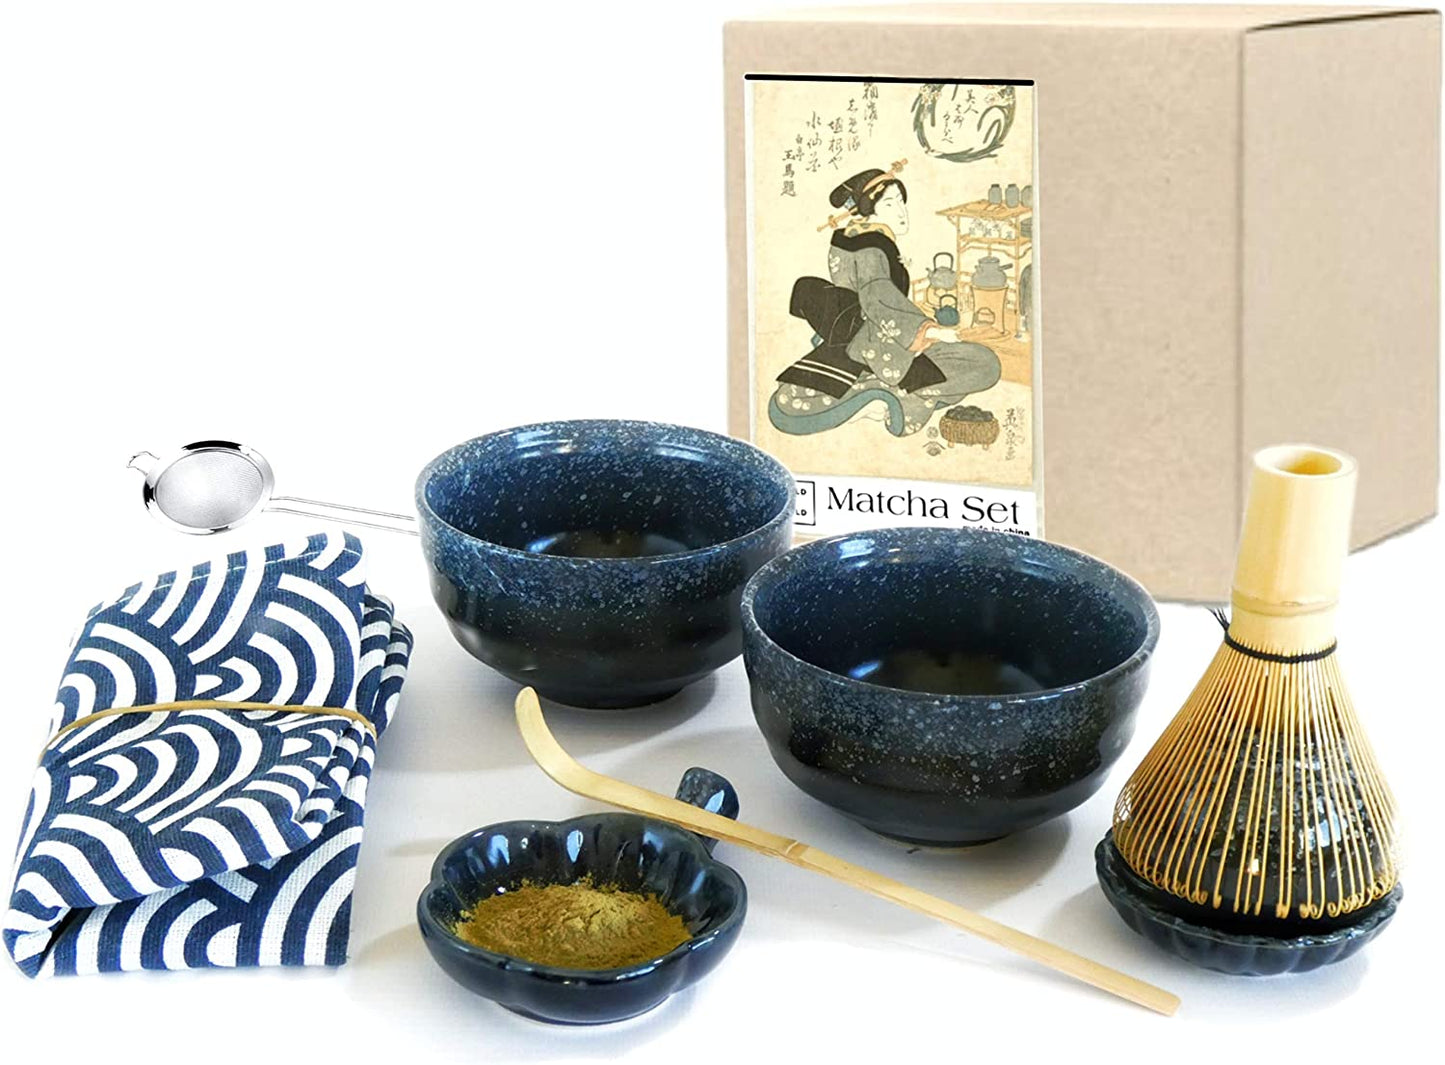 Harold & Harold 9 Pieces Matcha Starter Tea Set. 2 Bowl Kit With Japanese Ceremony Style Bamboo Whisk Mixer 2 Piece Special Unique Anti Drip Holder And Traditional Table Runner. Exclusive Accessories